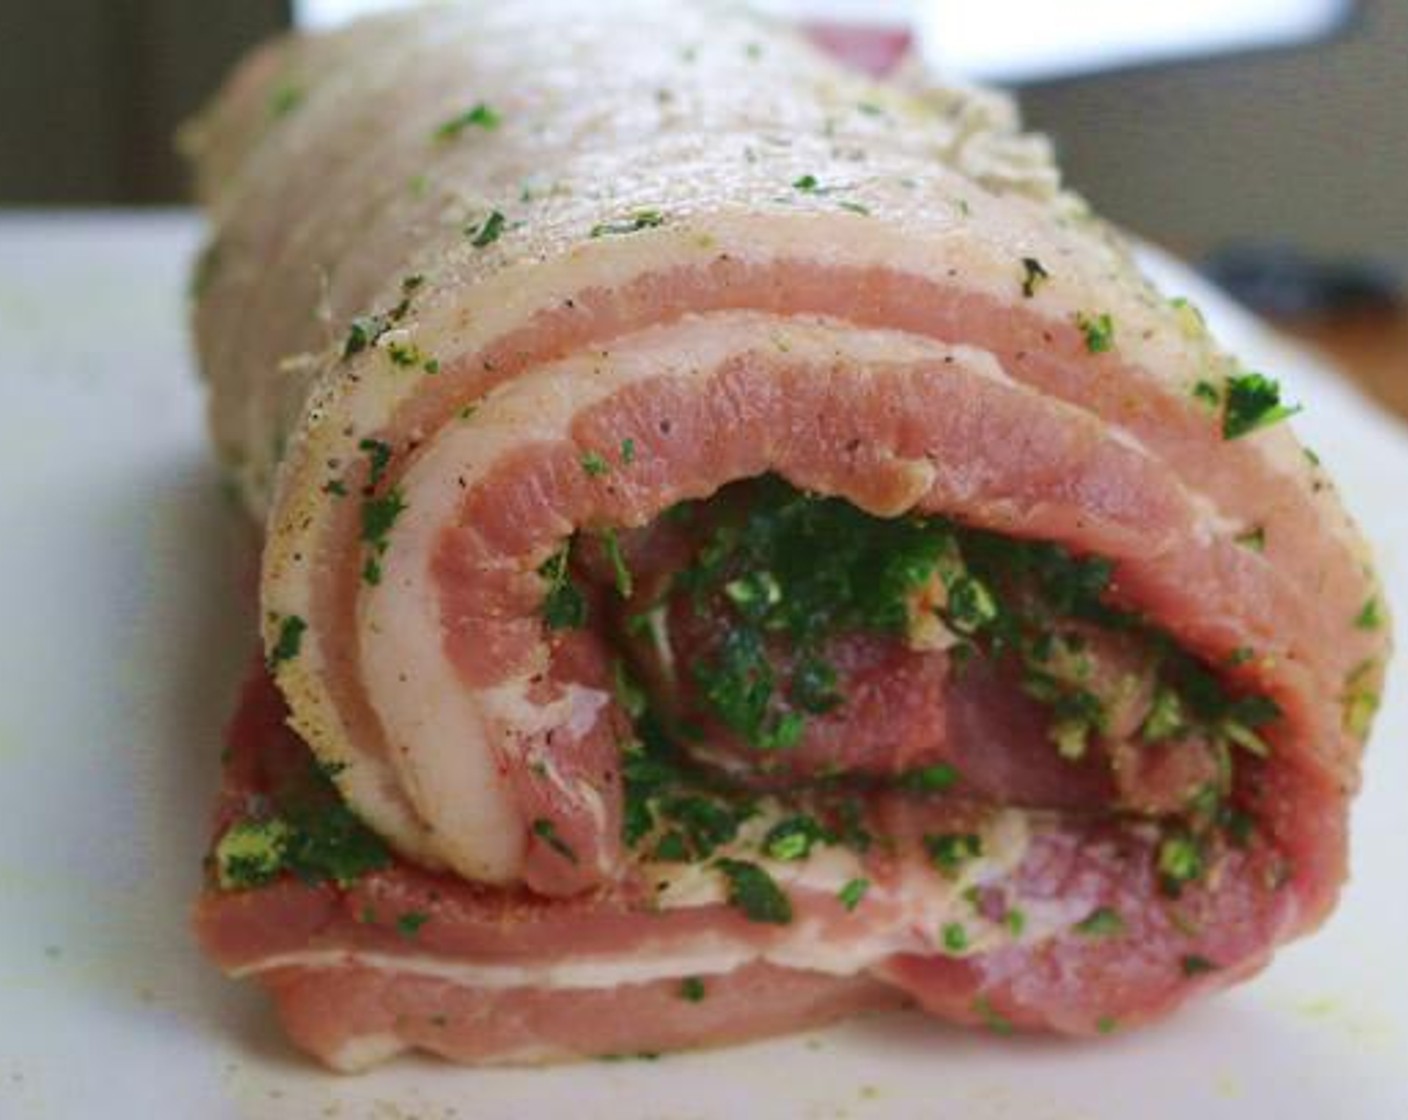 step 5 Wrap the pork belly around the pork tenderloin and secure with butcher twine in multiple locations. Make sure the twine is tight and spread out about 1inch apart. The result should be an even-sized Porchetta Roast.